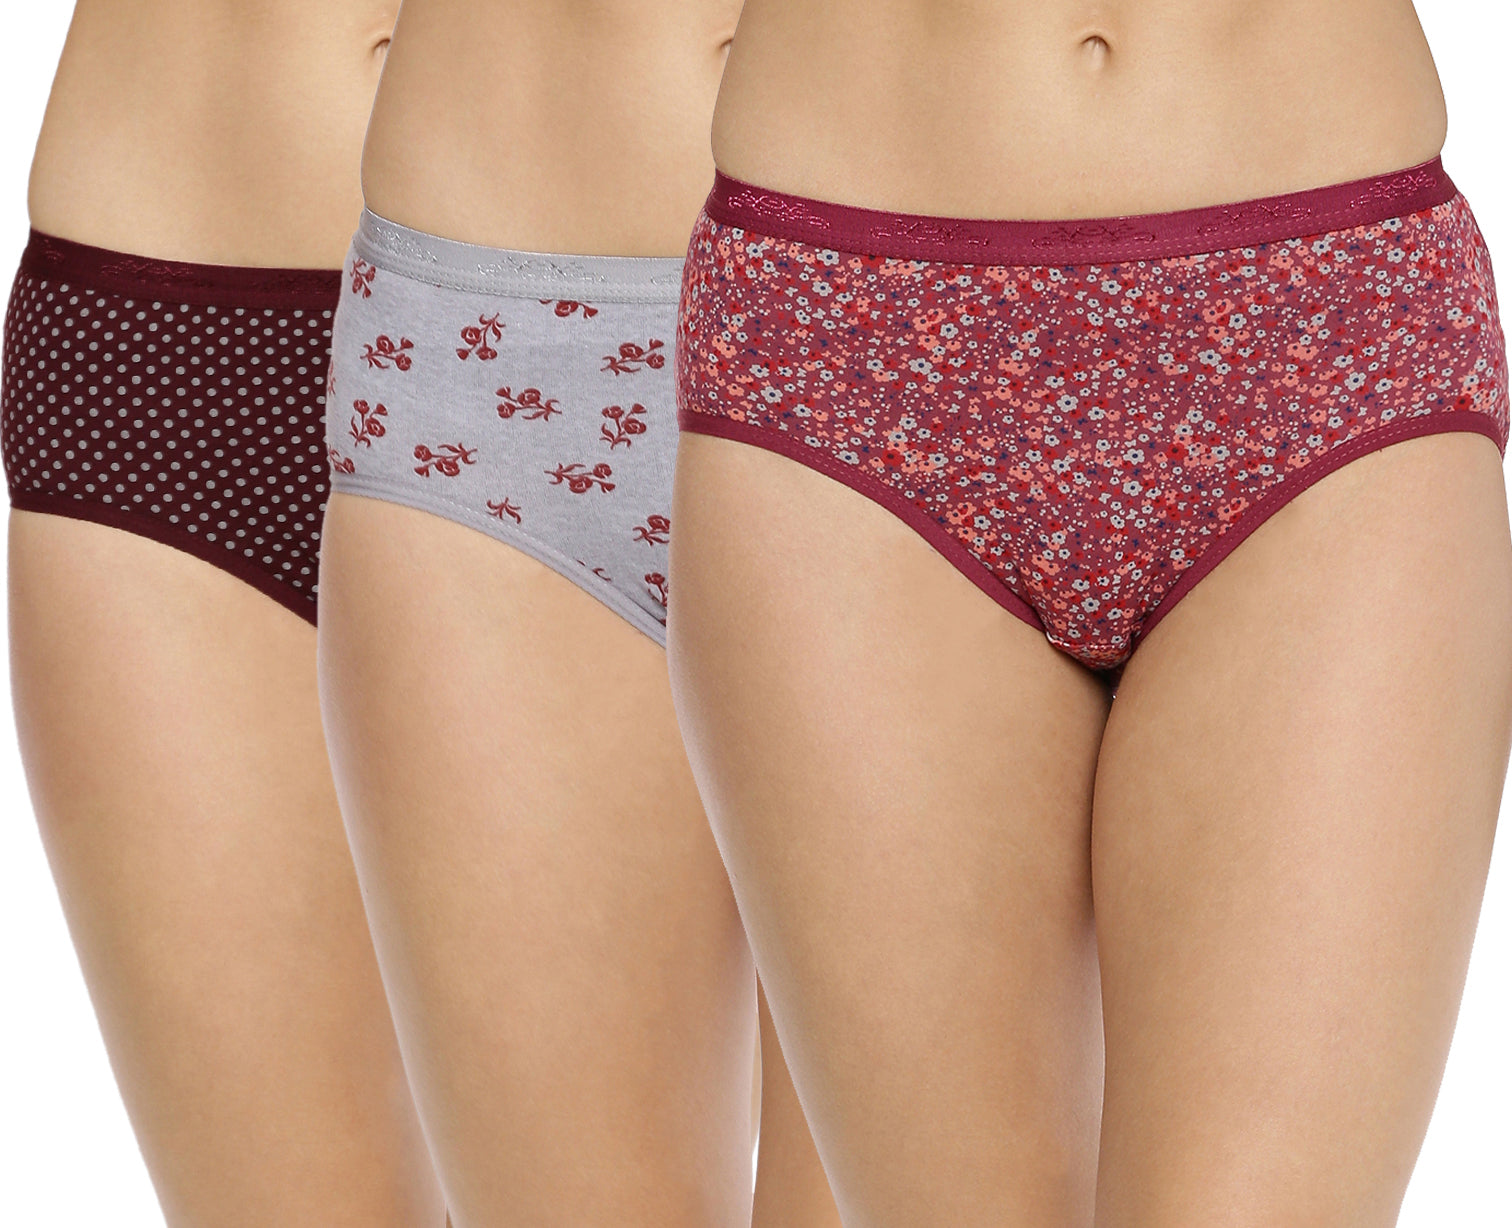 Red Rose Full Coverage Hipster Panties (Multicolor Pack of 3)